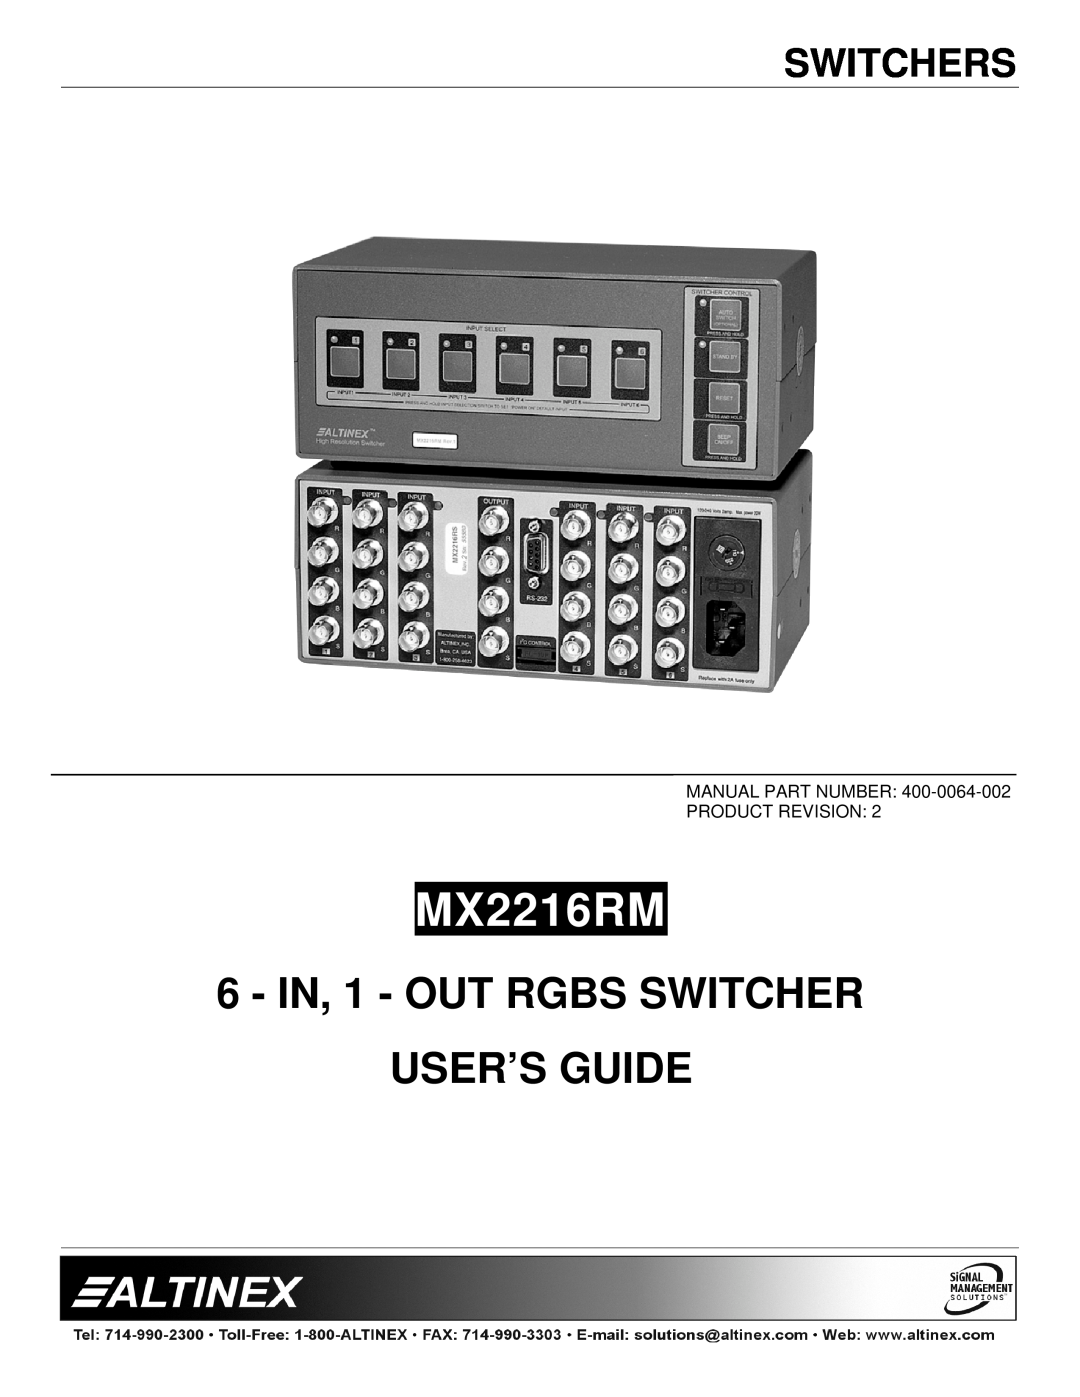 Altinex MX2216RM manual Switchers, IN, 1 - OUT RGBS SWITCHER USER’S GUIDE, Manual Part Number Product Revision 